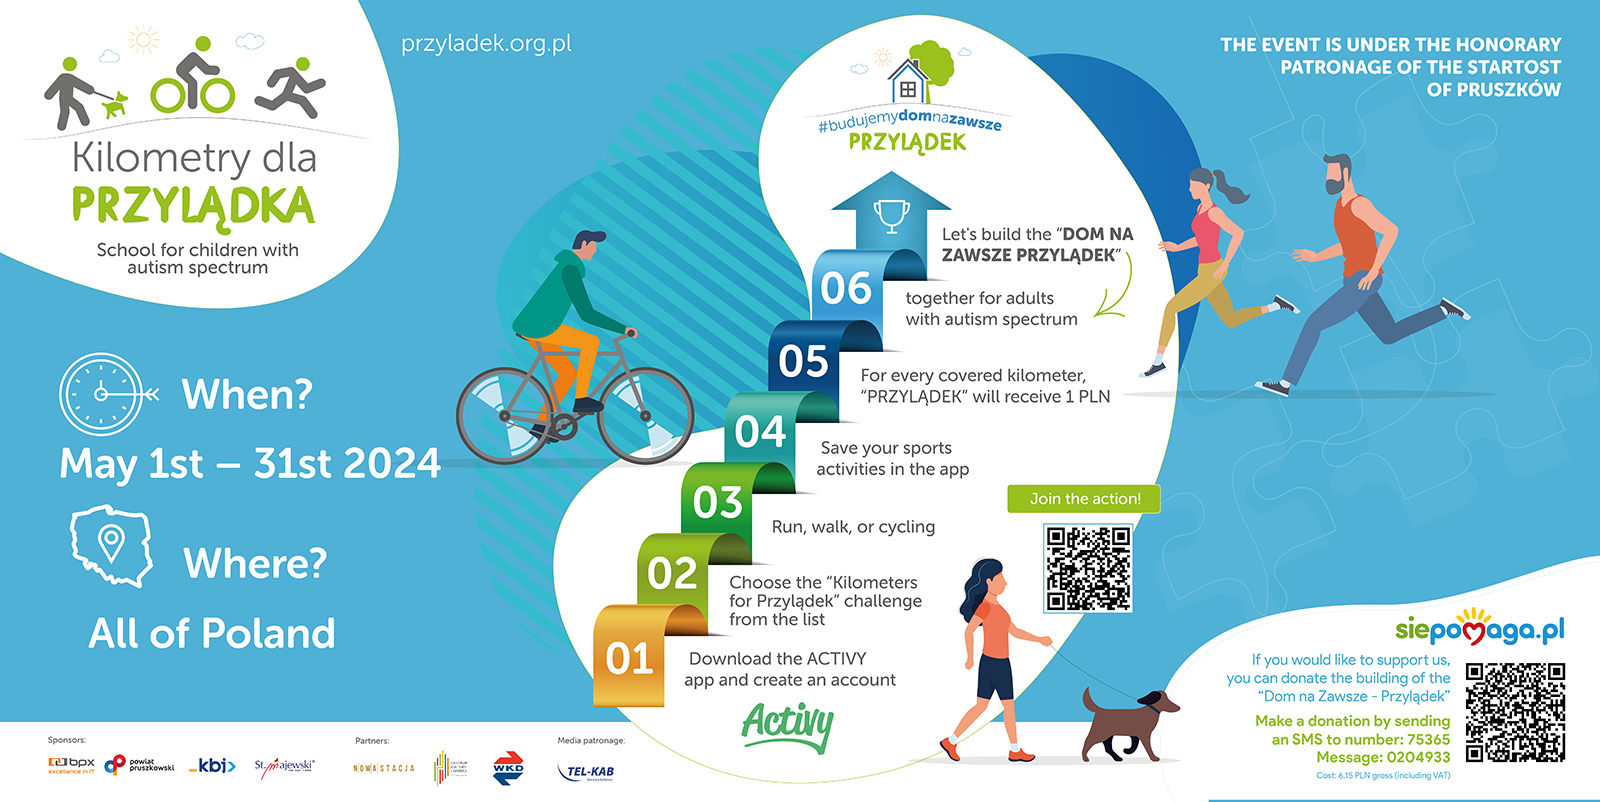 Graphic promoting the event. The image includes information in the article about how the event is going, who it is dedicated to and when it is taking place. - grafika artykułu